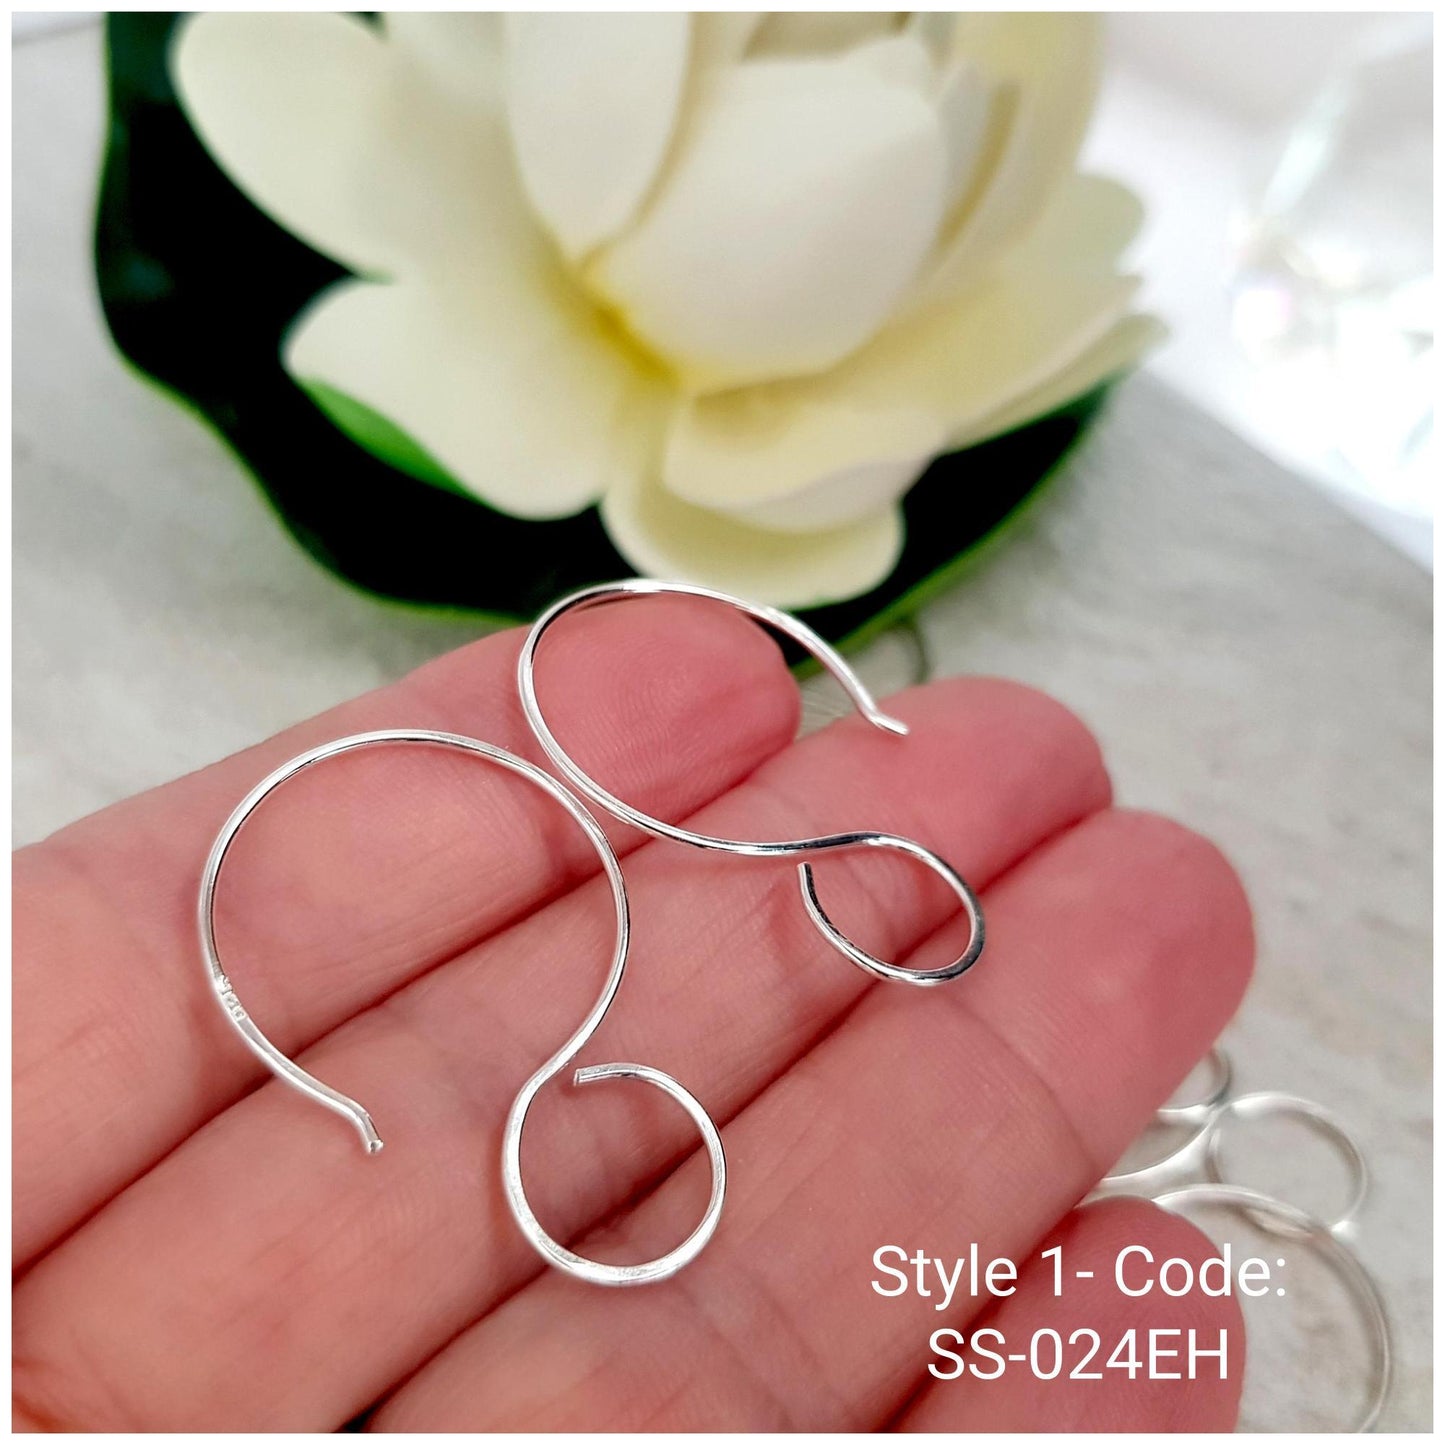 Handmade Silver 925 Large Hanging Loop Earring Wires for Polymer, Resin and Wood Design Earrings - Kalitheo Earring Findings